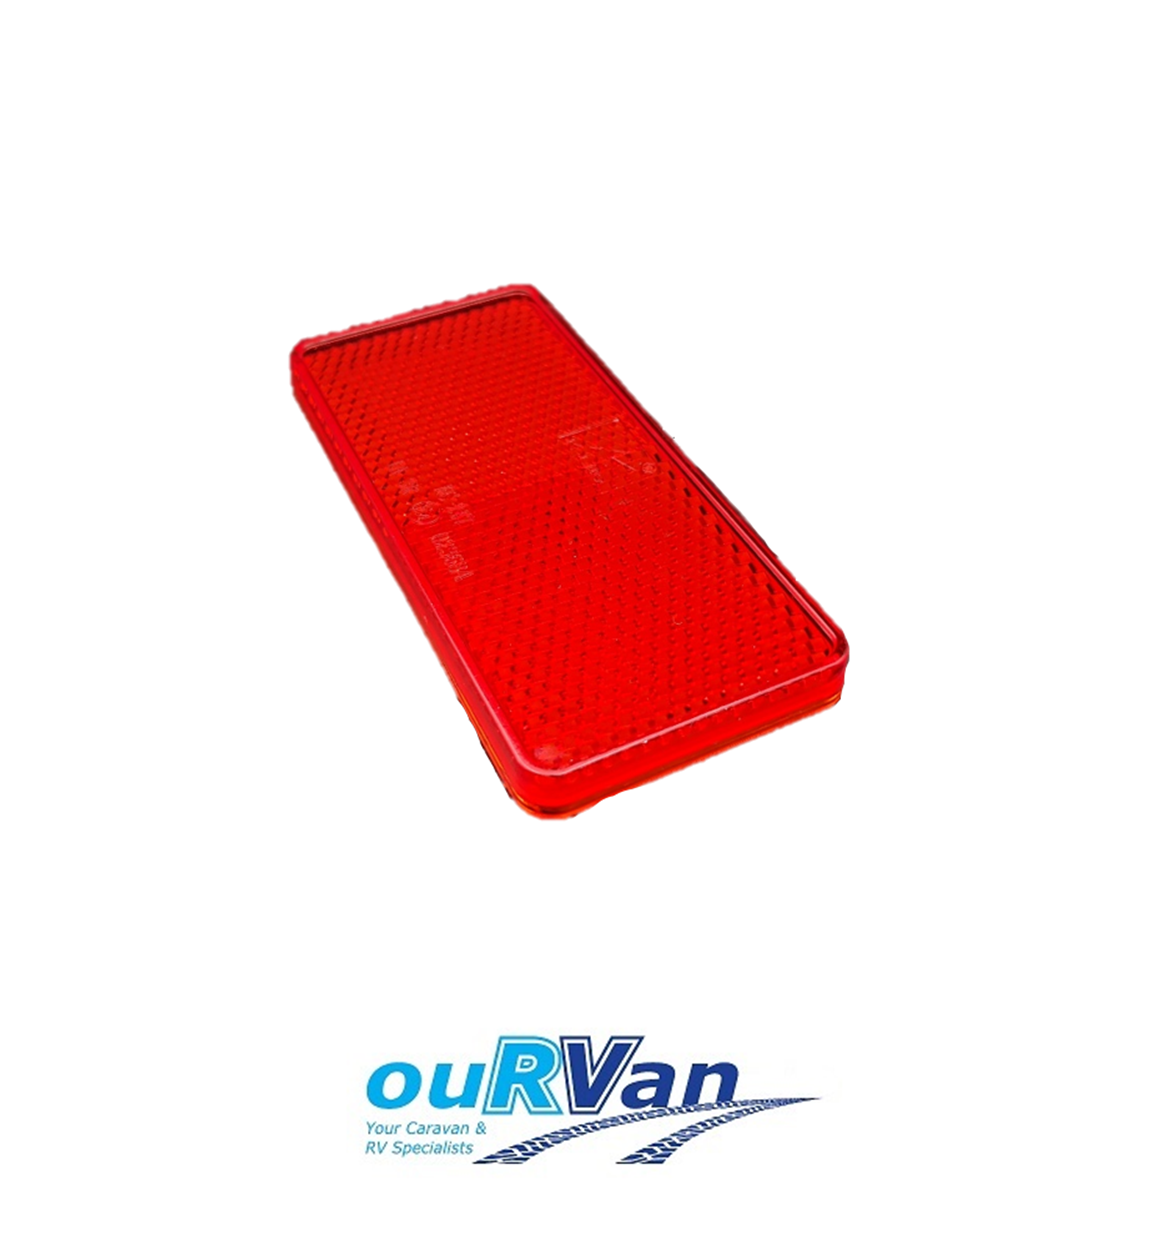 1 x 84052 EQUIVALENT 94mm x 44mm RED SELF ADHESIVE REFLECTOR